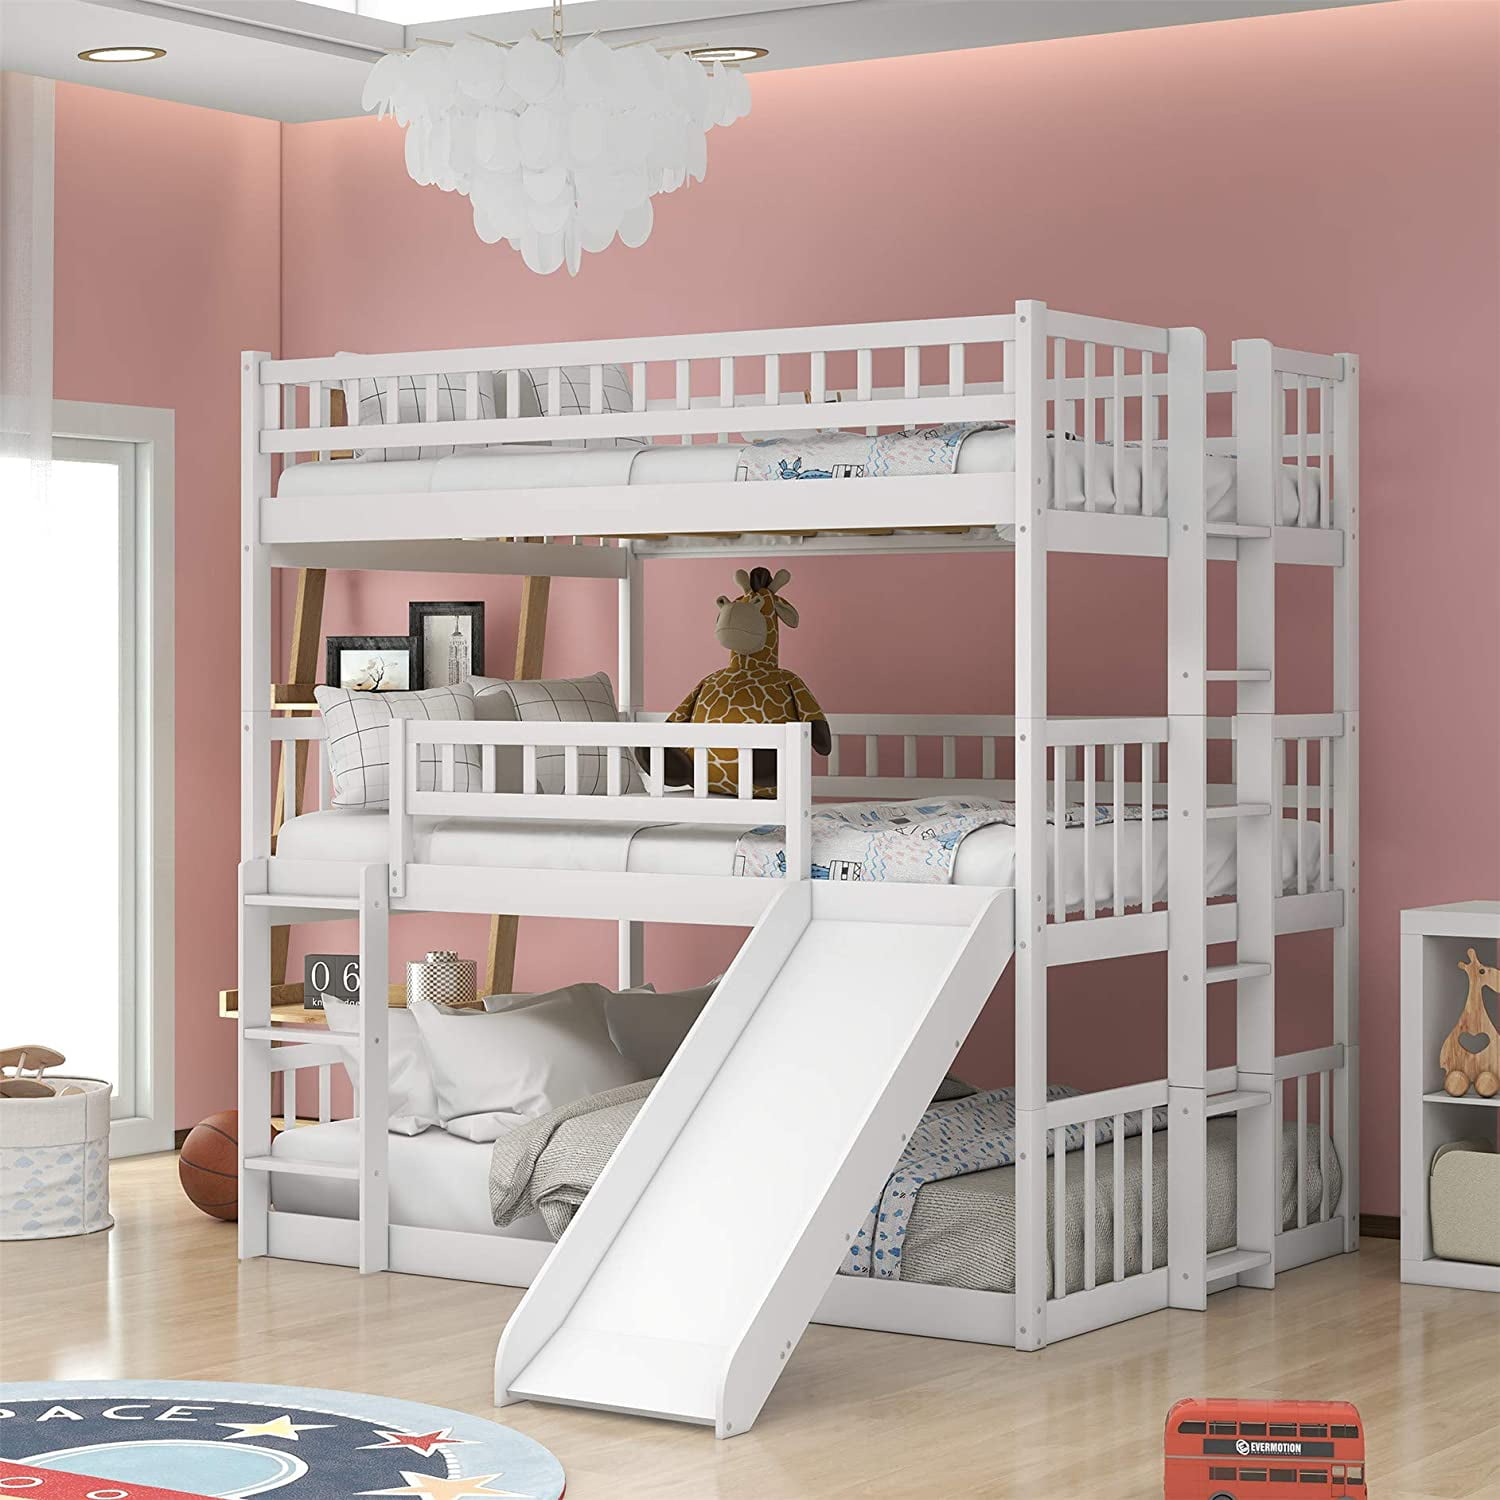 Full Triple Bunk Bed With Slide, Build Your Own Bunk Bed With Slide